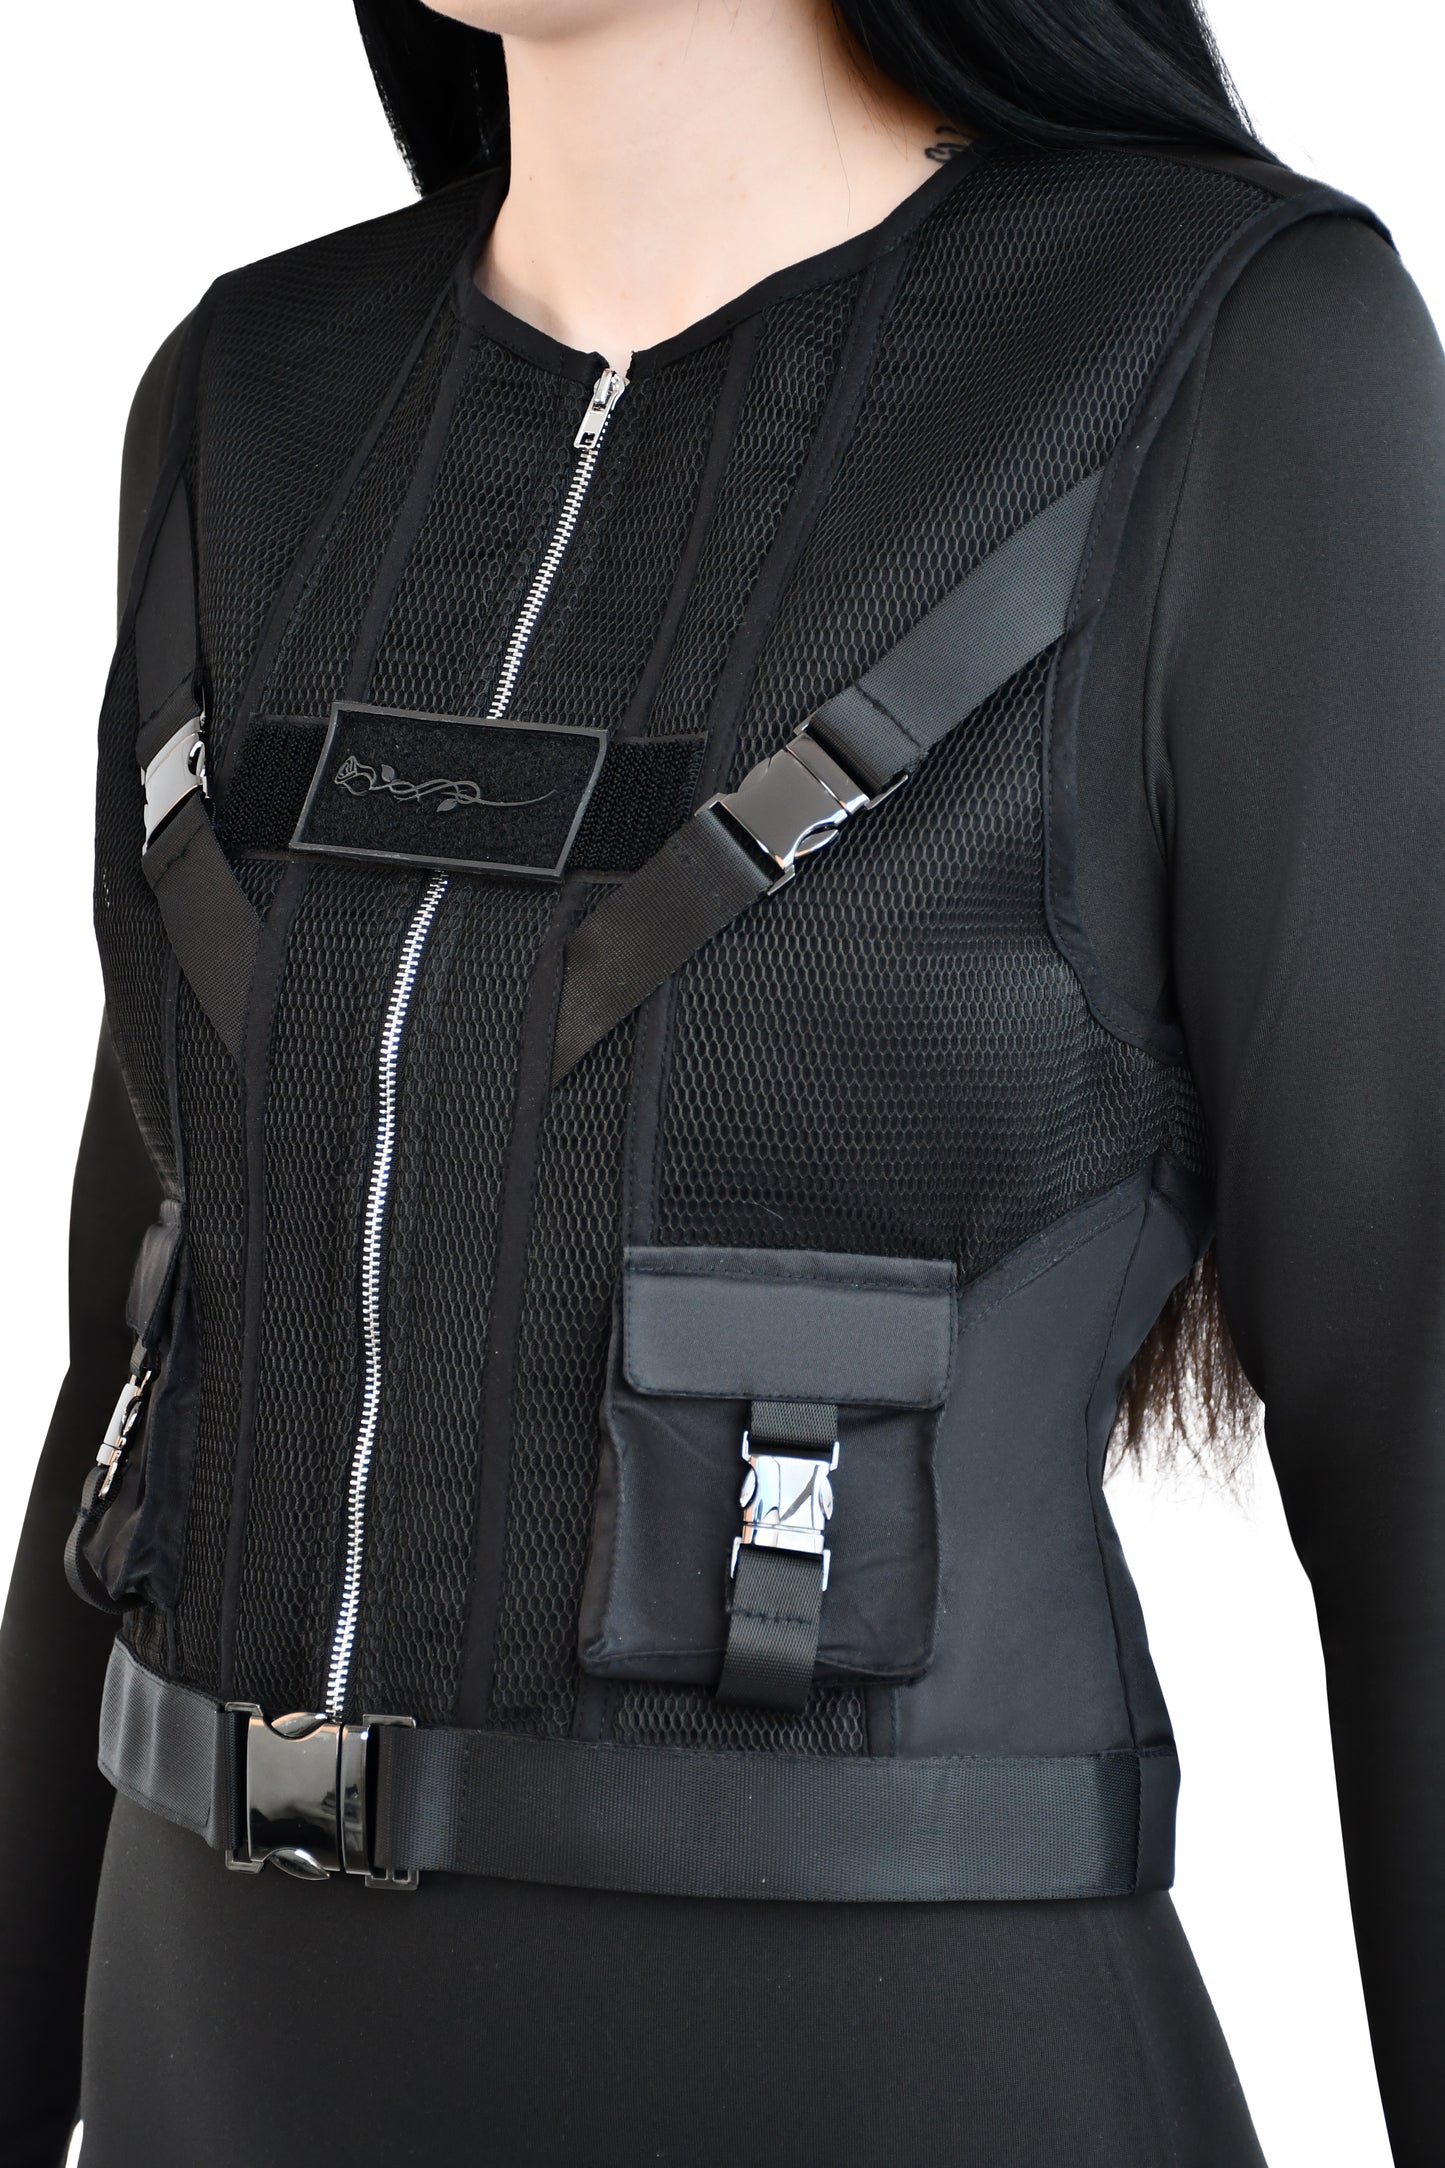 Women's Tactical Mesh Vest with Straps and Utility Pockets